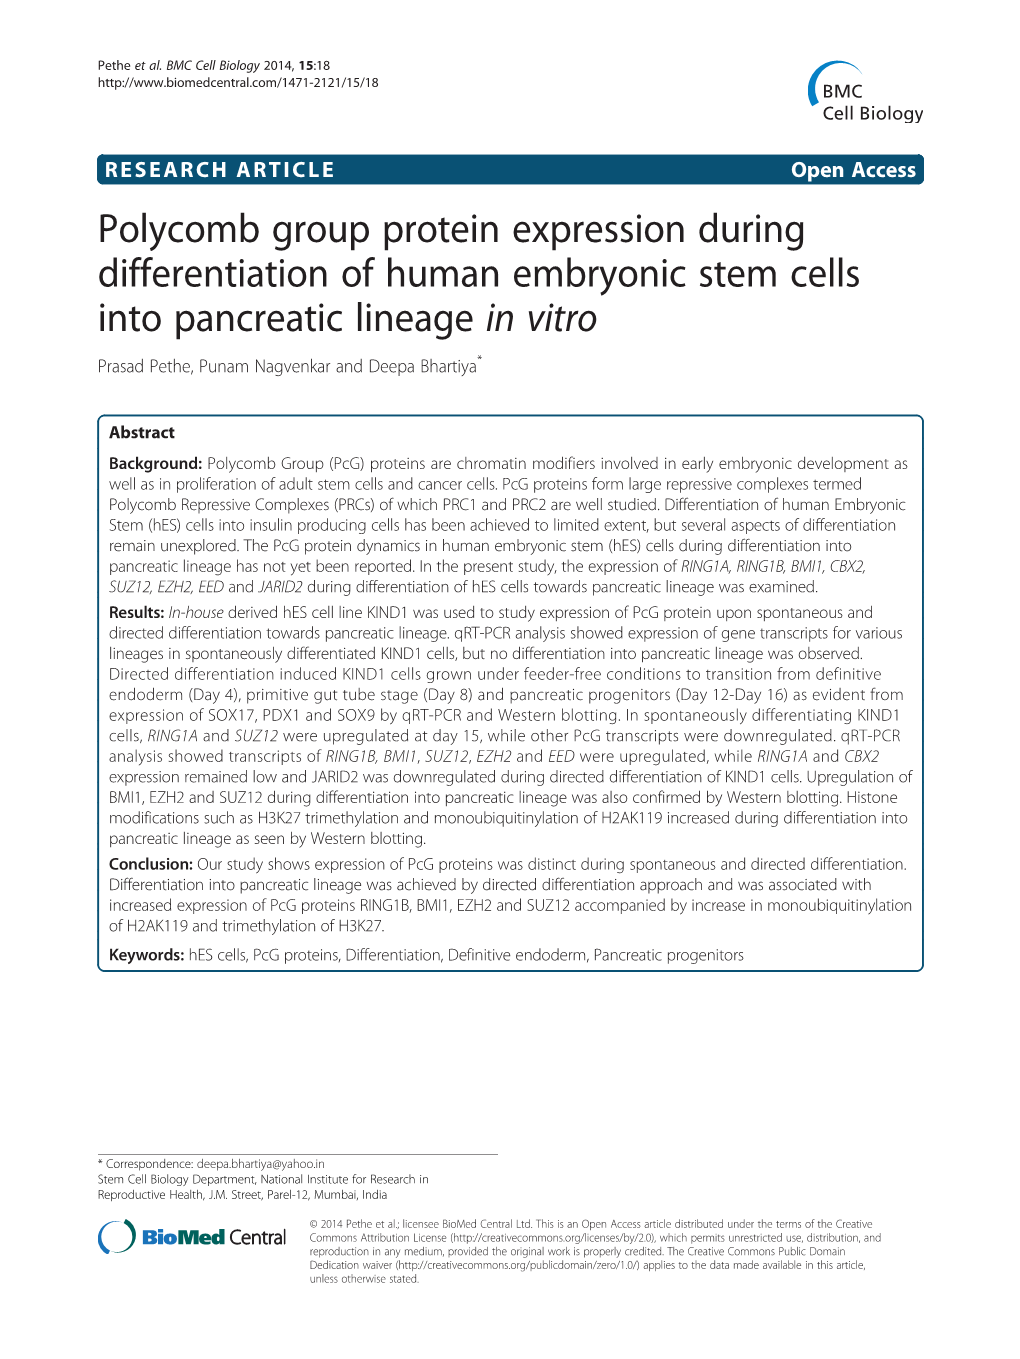 Polycomb Group Protein Expression During Differentiation of Human